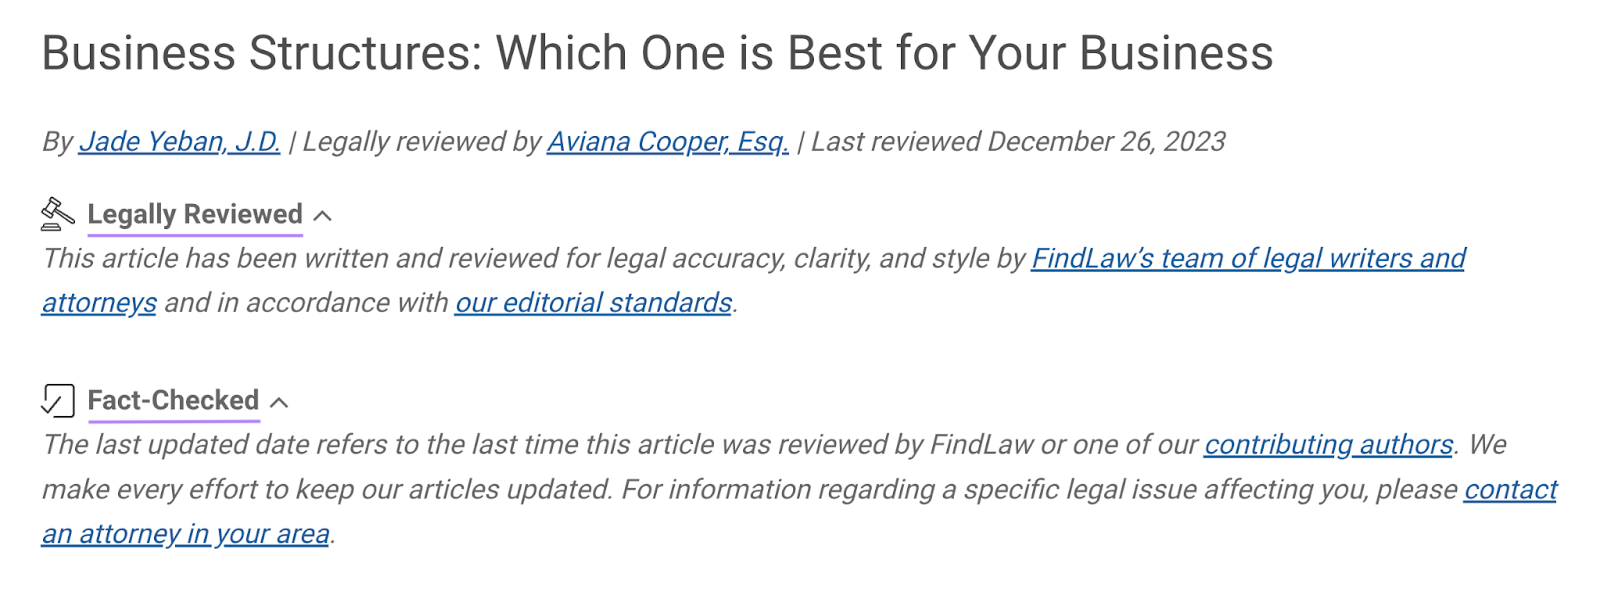 FindLaw's content is legally reviewed and fact-checked